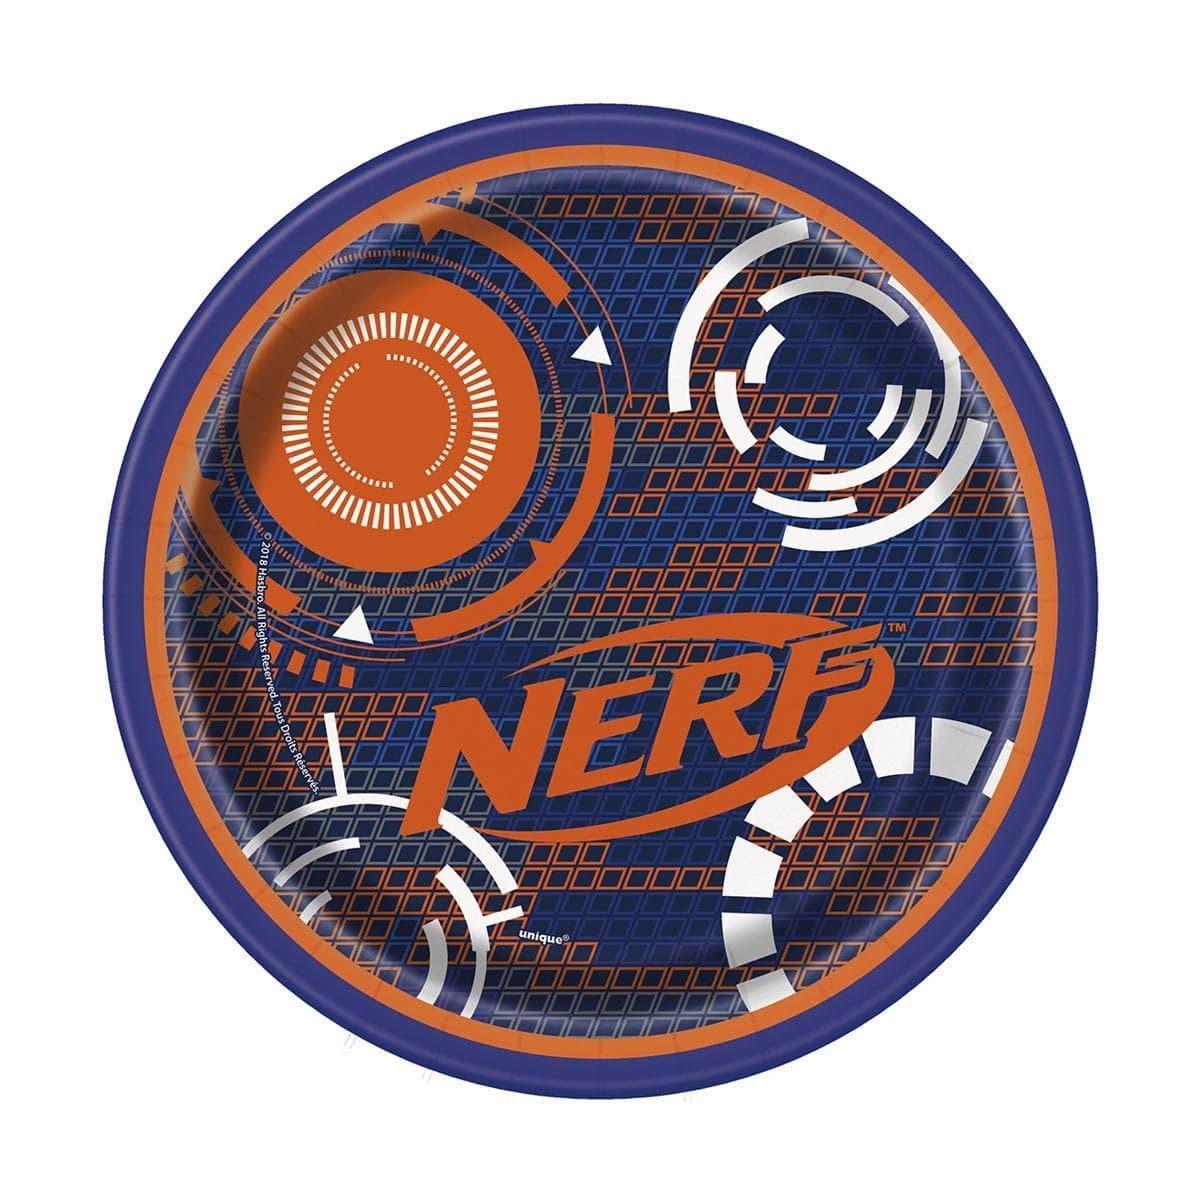 Buy Kids Birthday Nerf Dessert Plates 7 inches, 8 per package sold at Party Expert